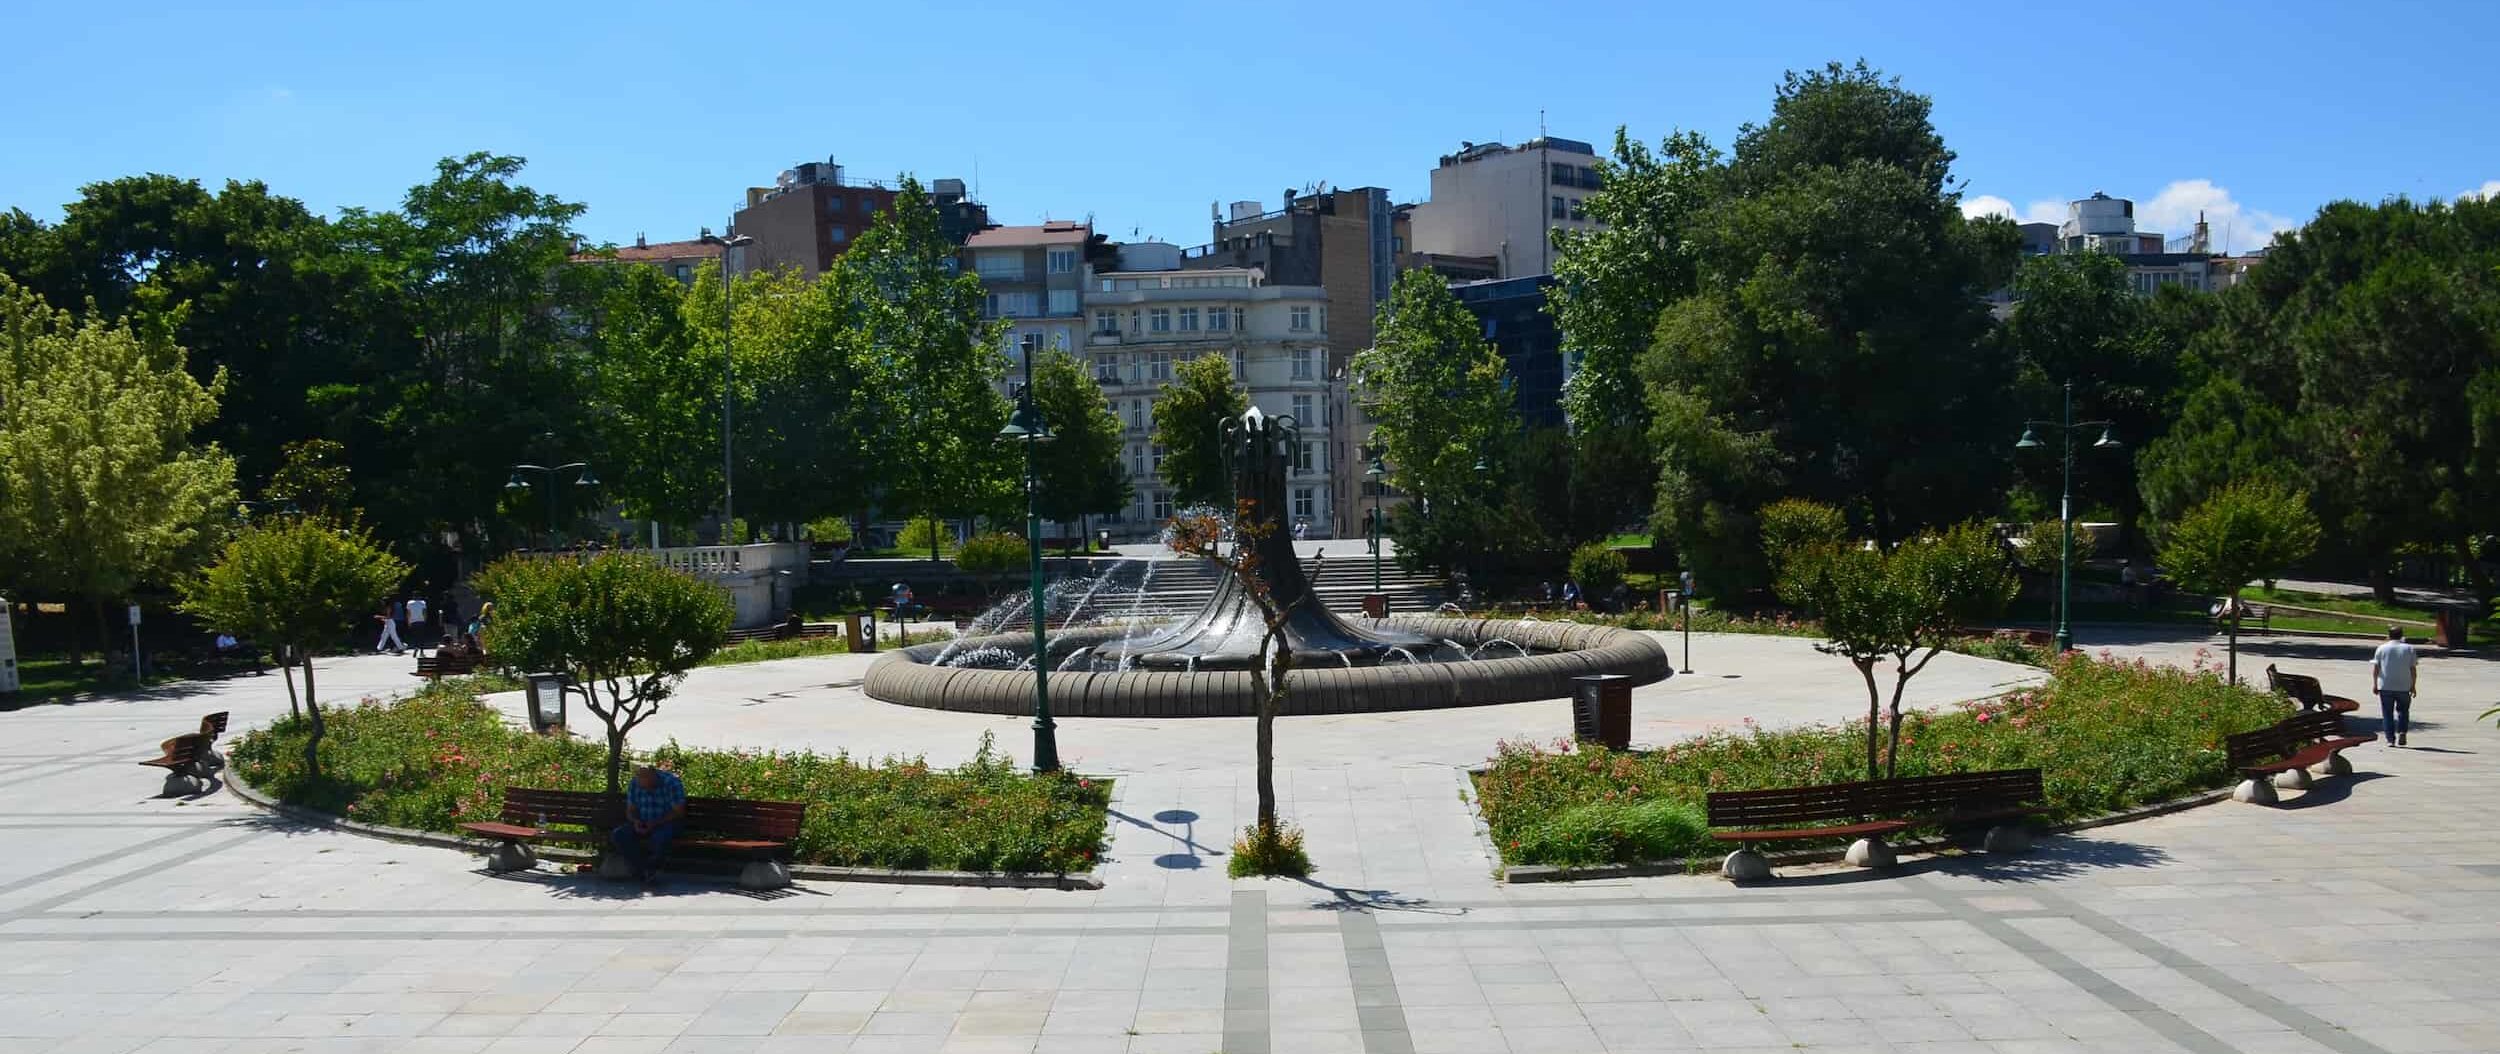 Fountain at Gezi Park at Taksim Square in Istanbul, Turkey